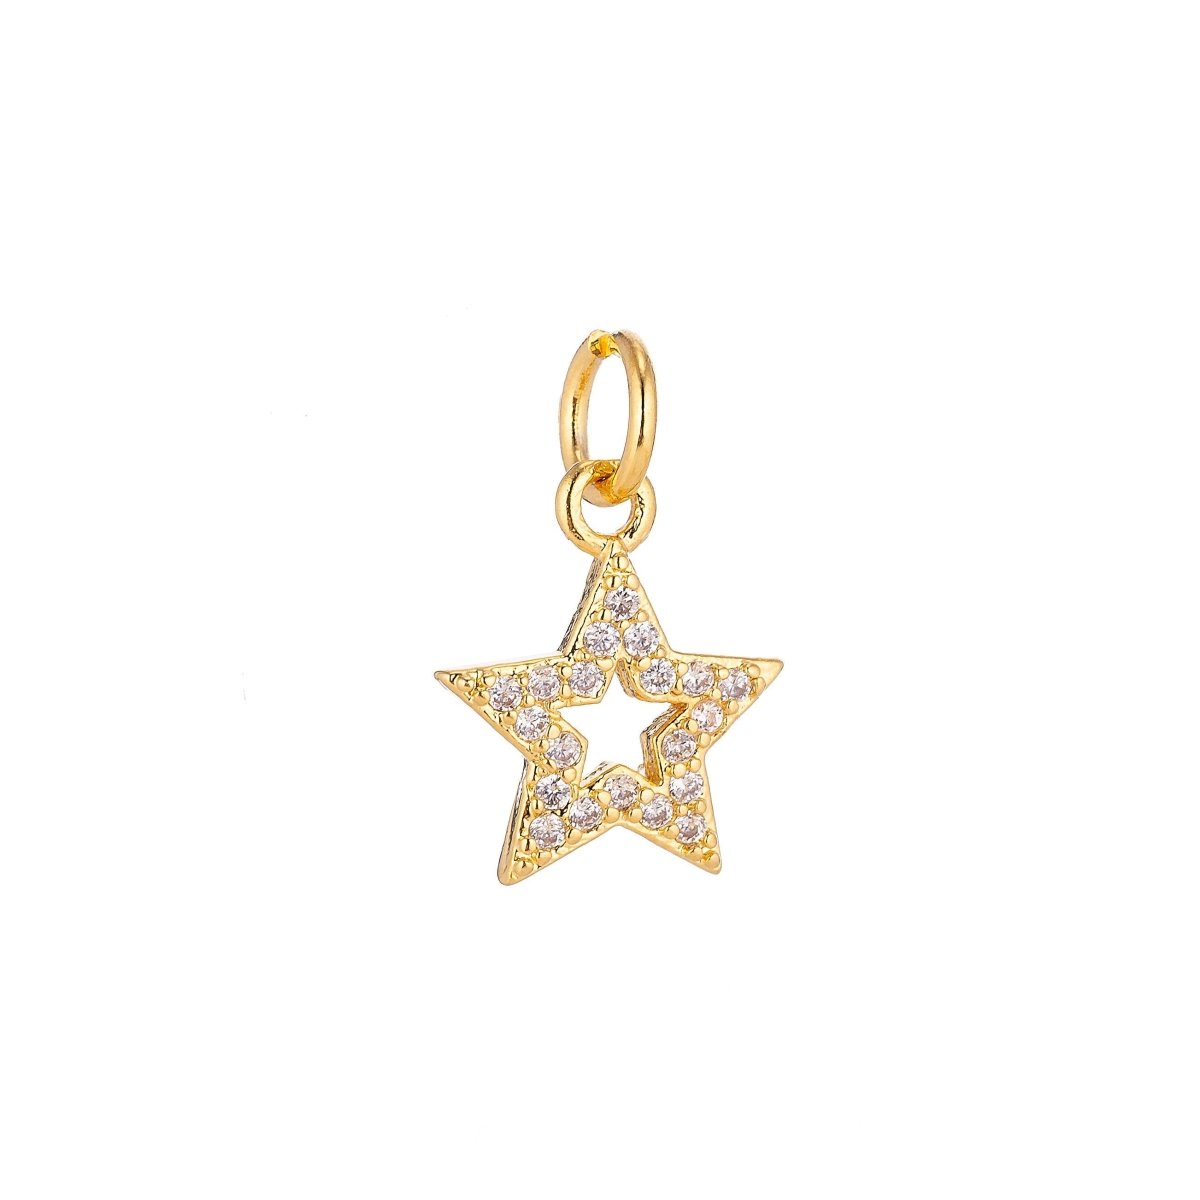 18K Gold Filled Dainty Cute Shining Star Stars Cubic Zirconia Necklace Pendant Bracelet Earring Charm for Jewelry Making C-071 - DLUXCA